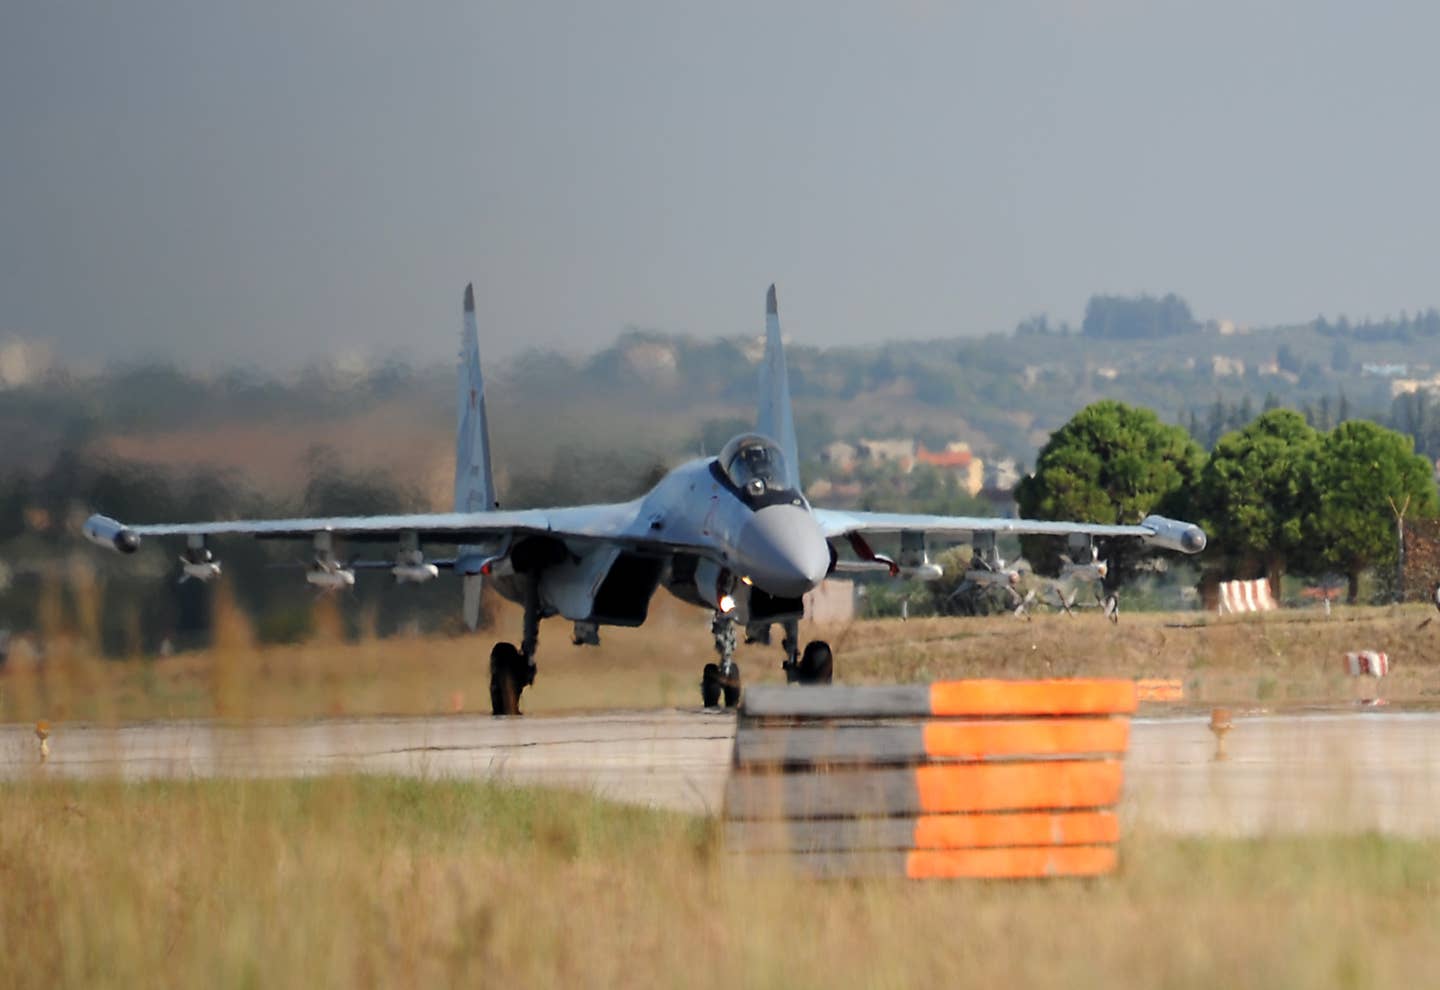 A Russian Aerospace Forces Su-35S prepares to take off from the Russian military airbase of Khmeimim in Syria, in September 2019. <em>Photo by MAXIME POPOV/AFP via Getty Images</em>